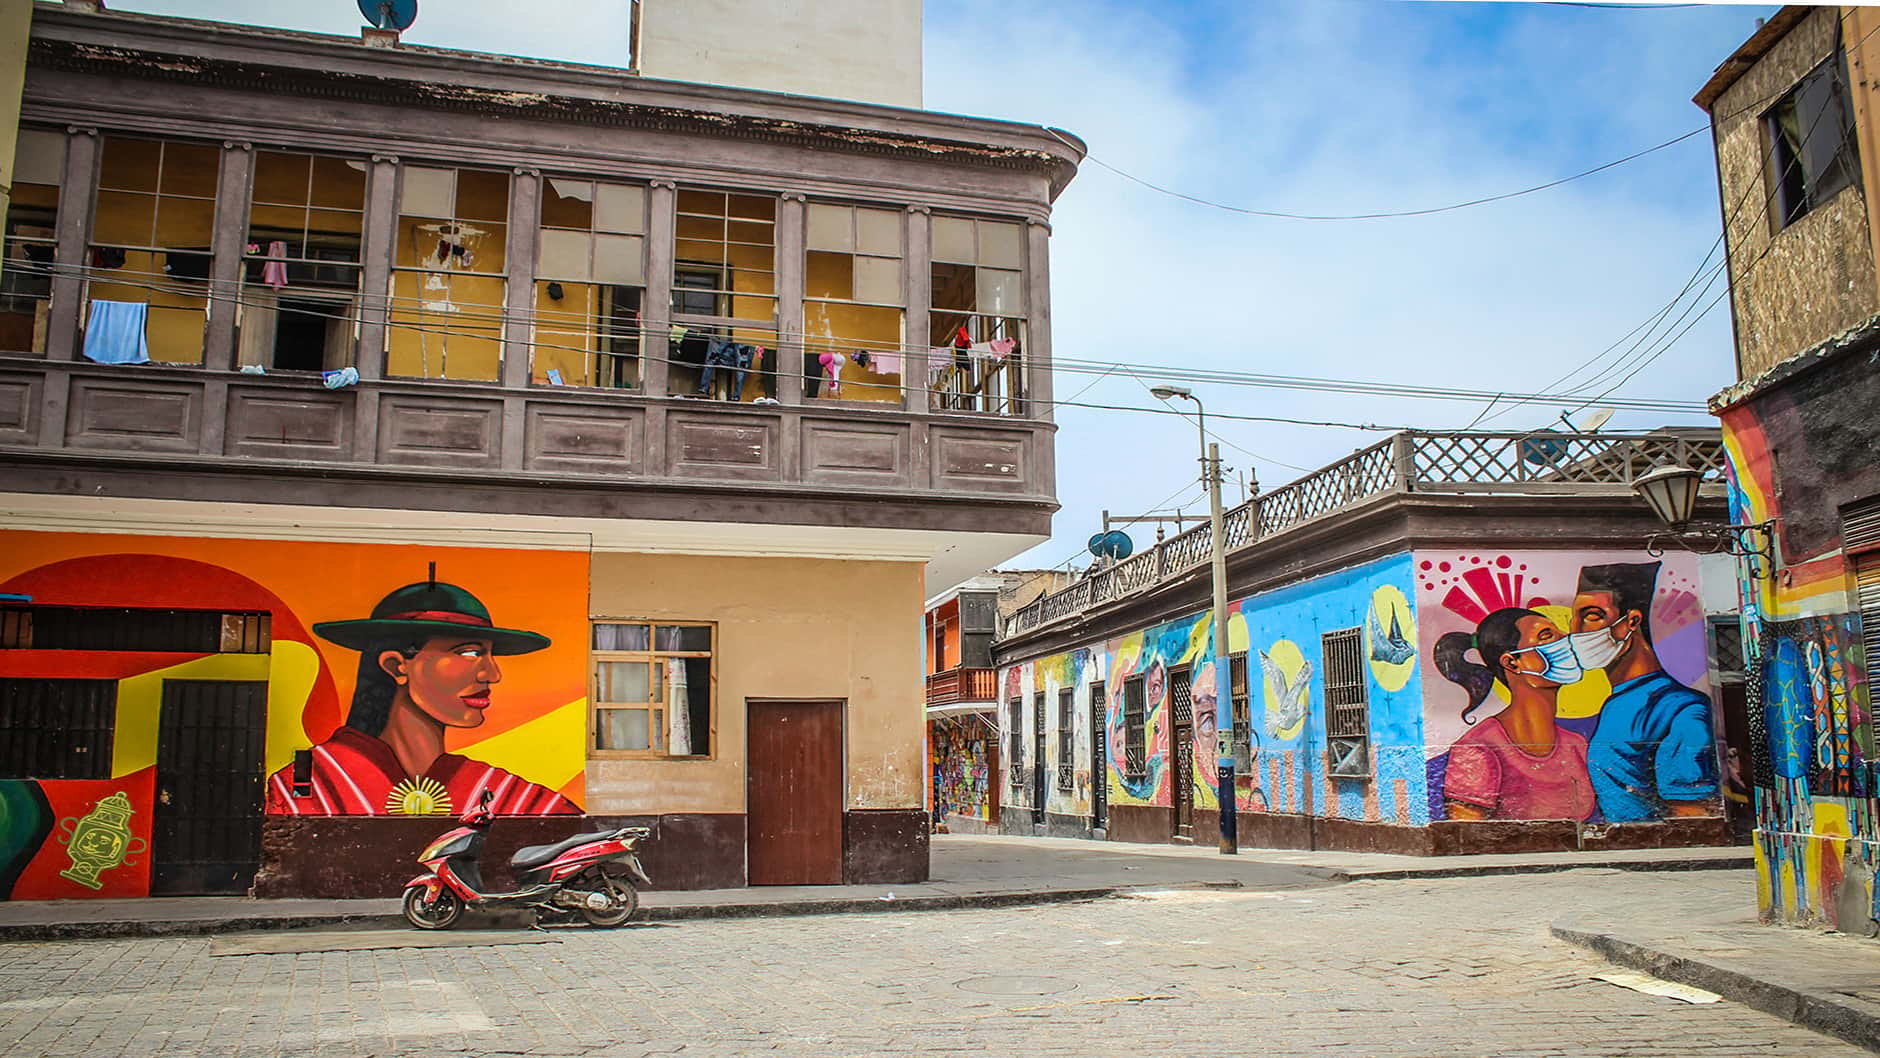 Several street murals can be seen on city buildings in Lima during a tour with Responsible Travel Peru